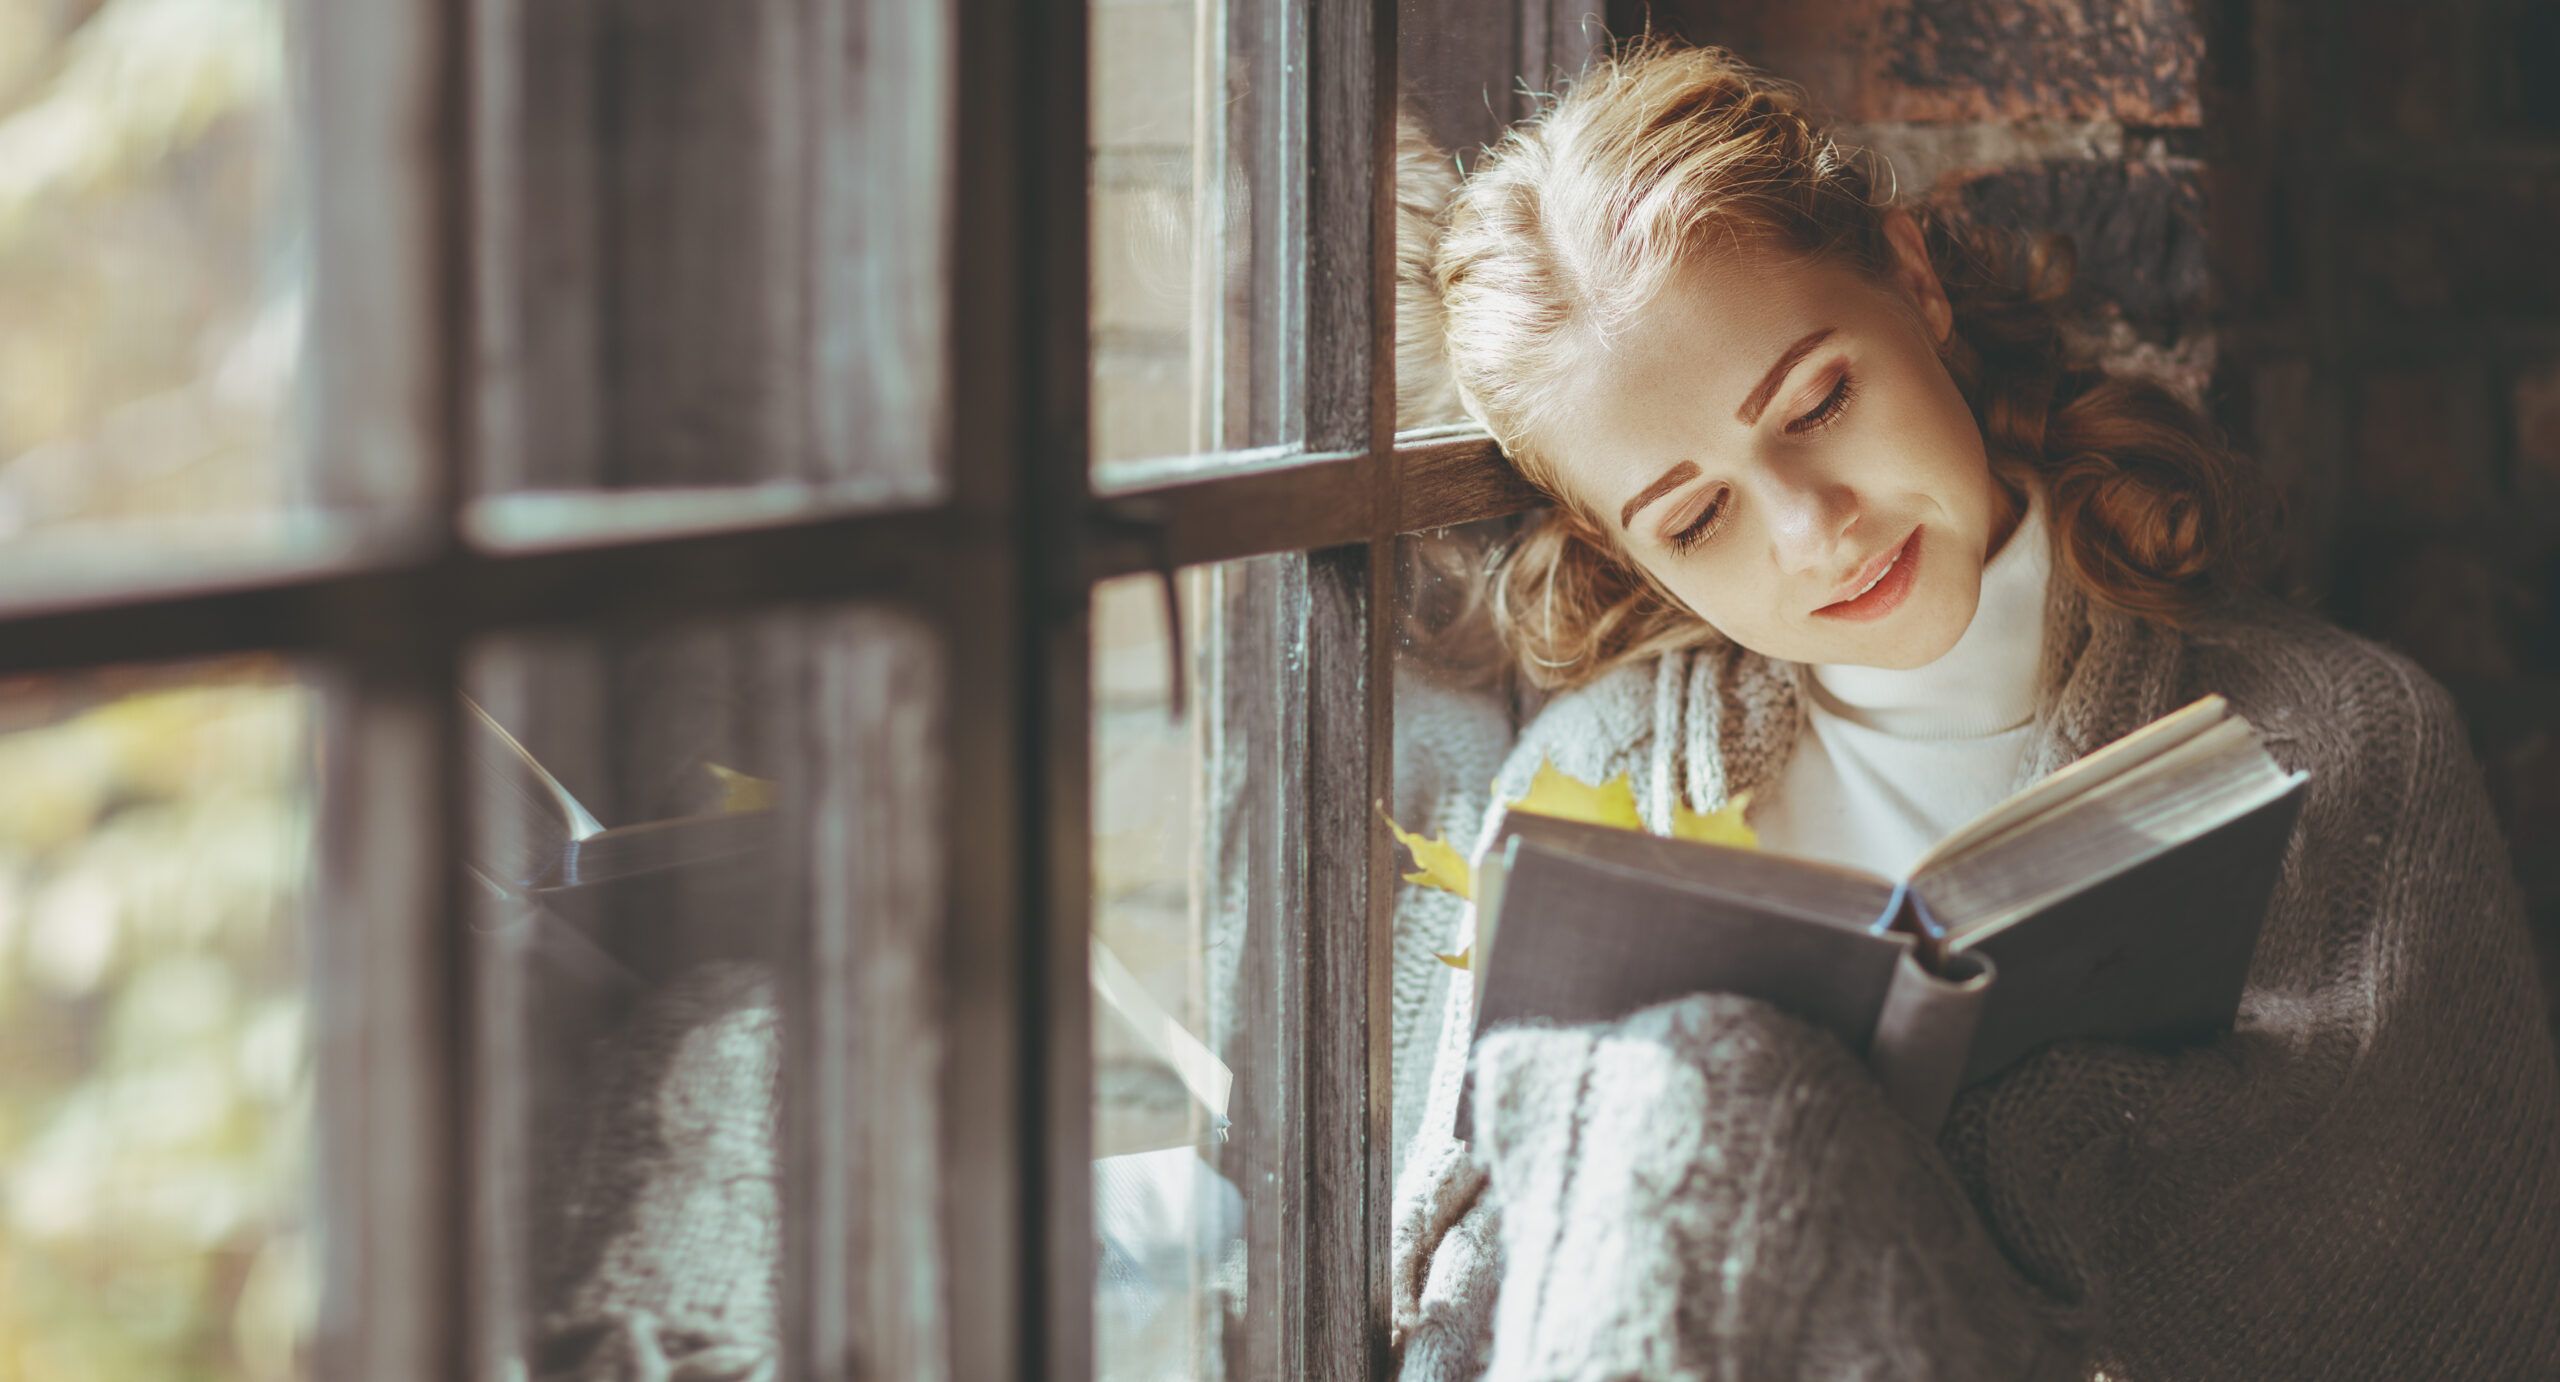 Happy young woman reading book by window in fall (Getty)